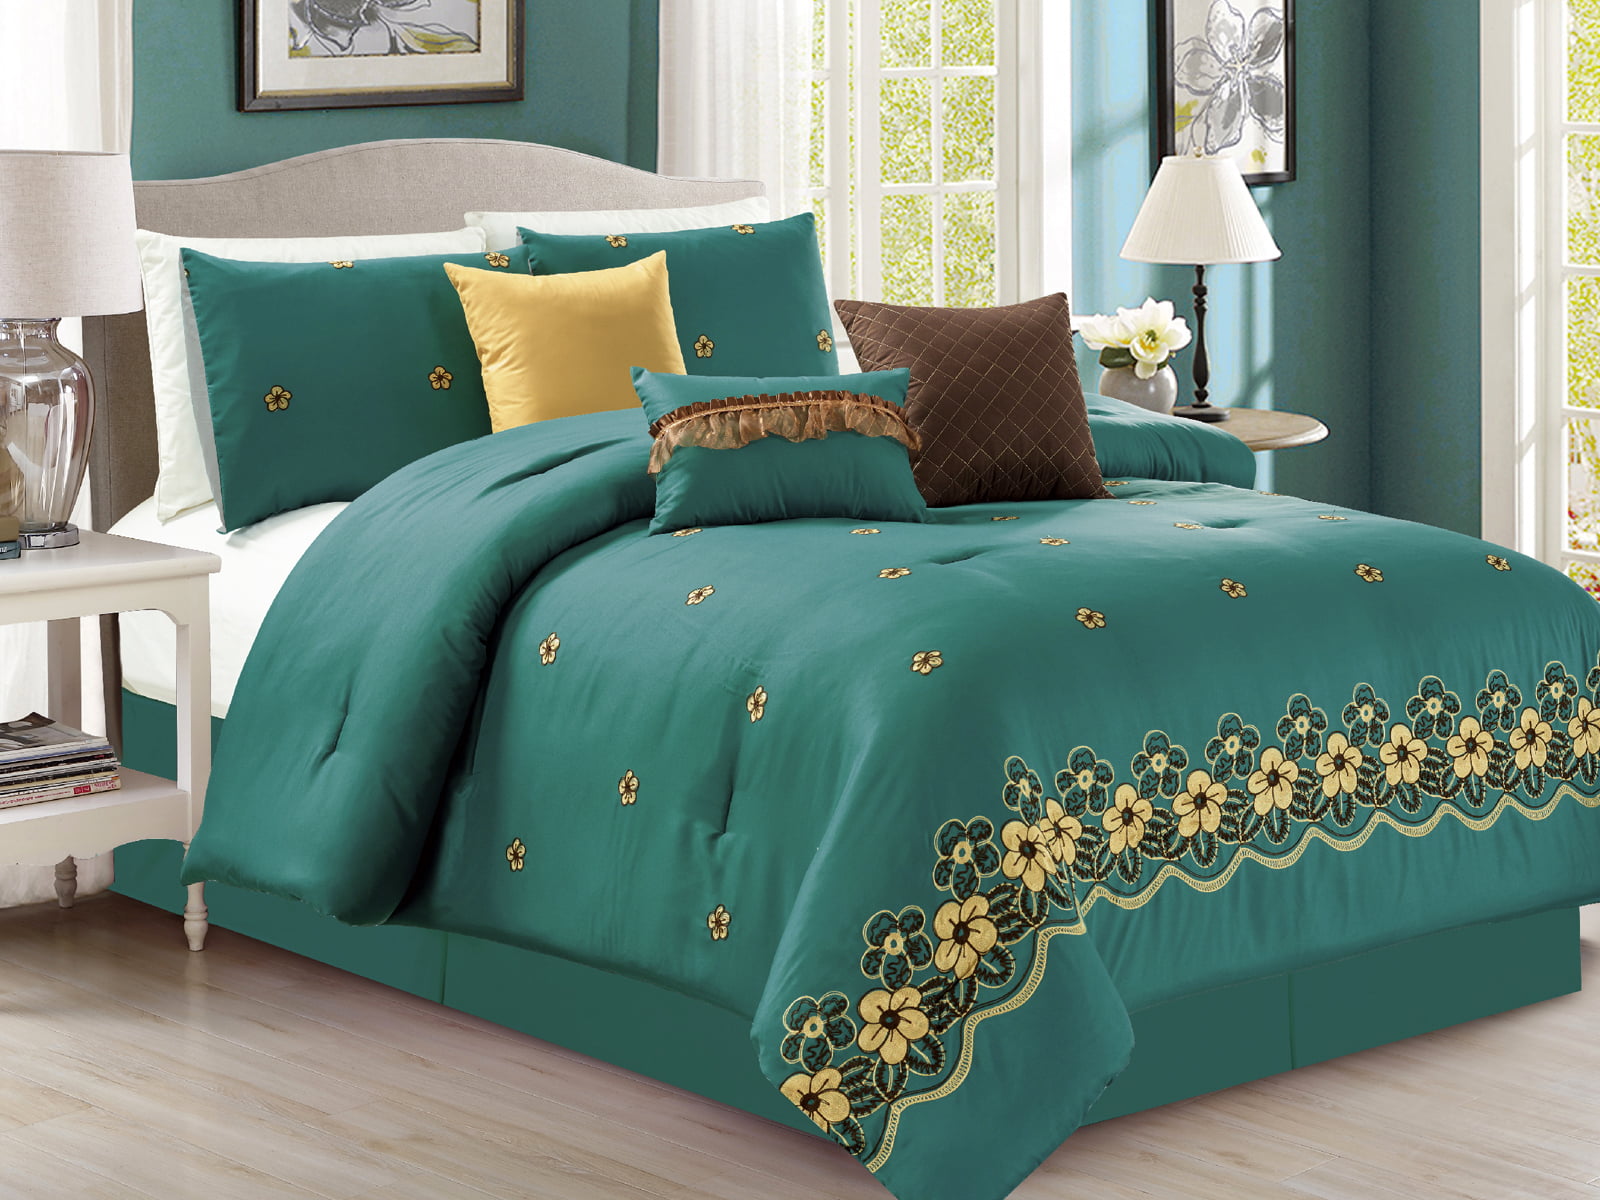 7-Pc Eleanor Floral Blossom Embroidery Comforter Set Teal Green-Blue Gold K...